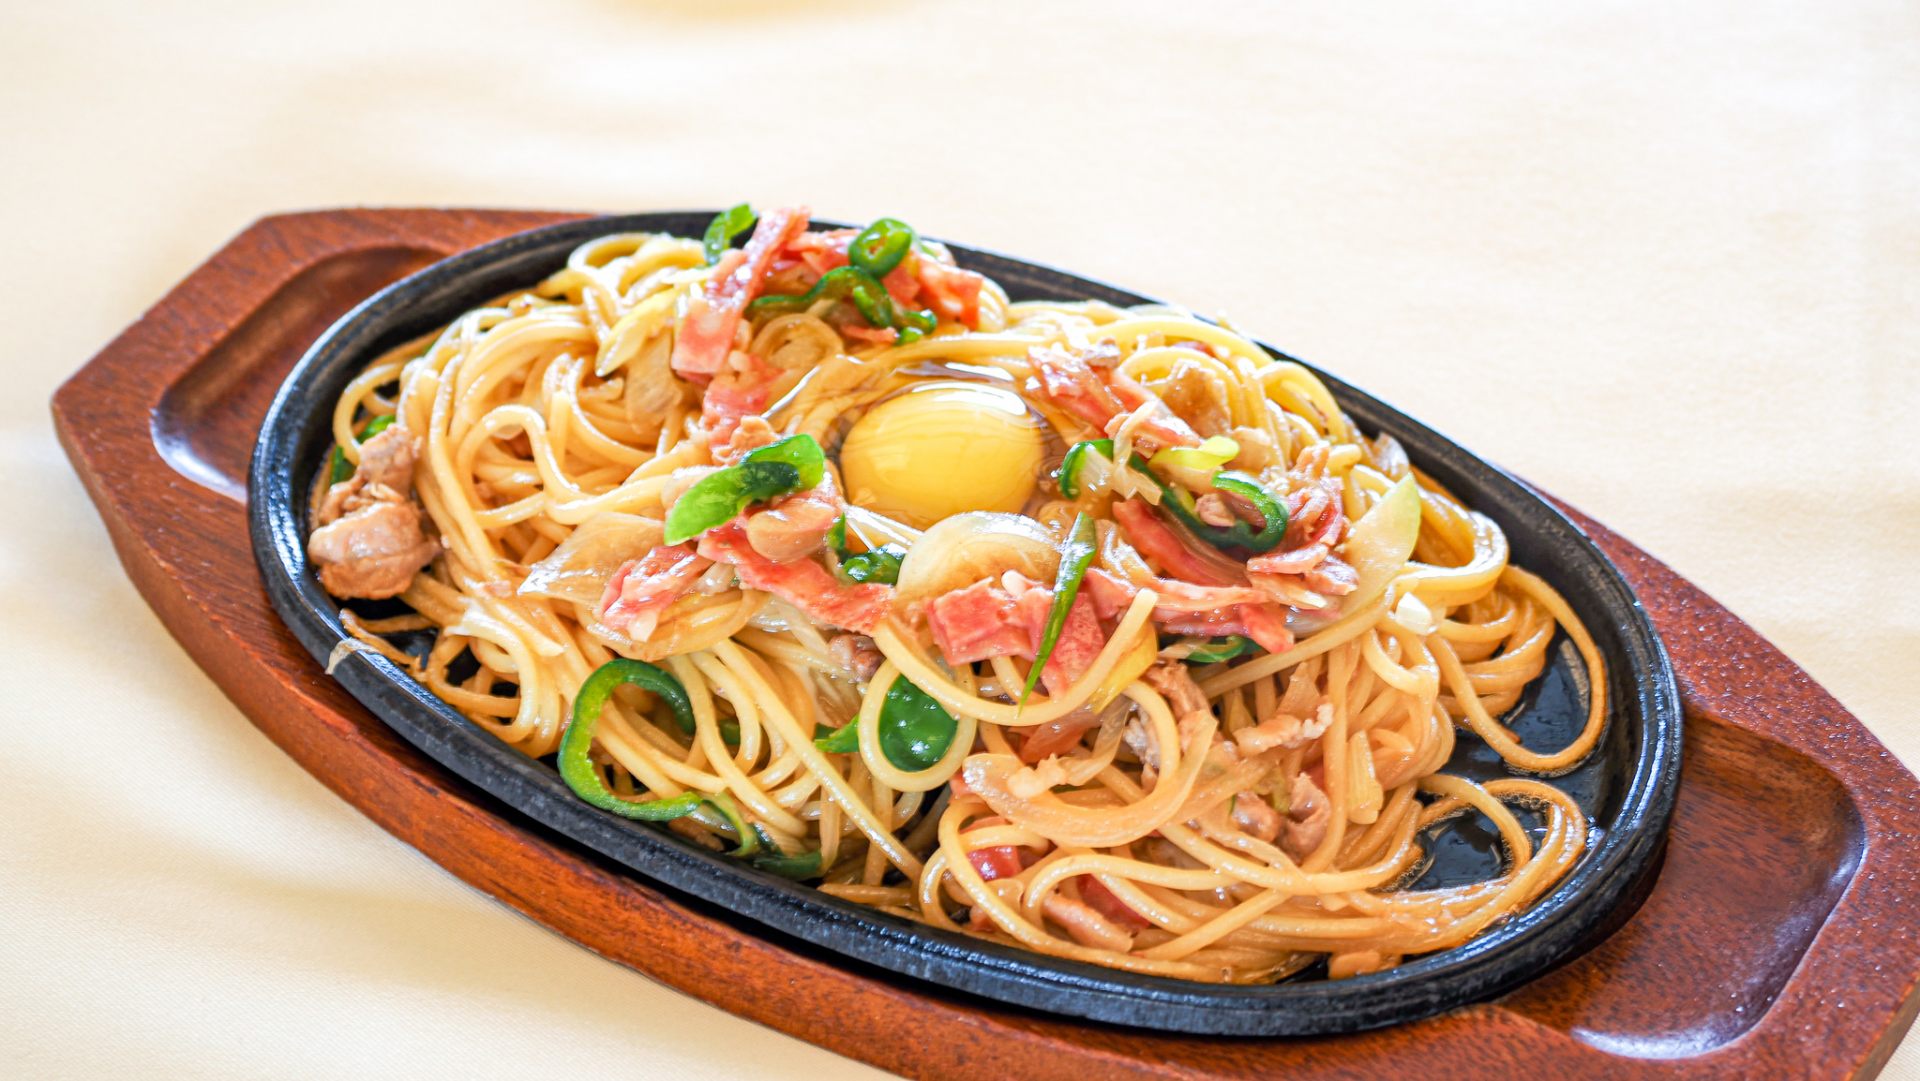 Serving style of "Japanese style Pasta" at Century Royal Hotel at the time